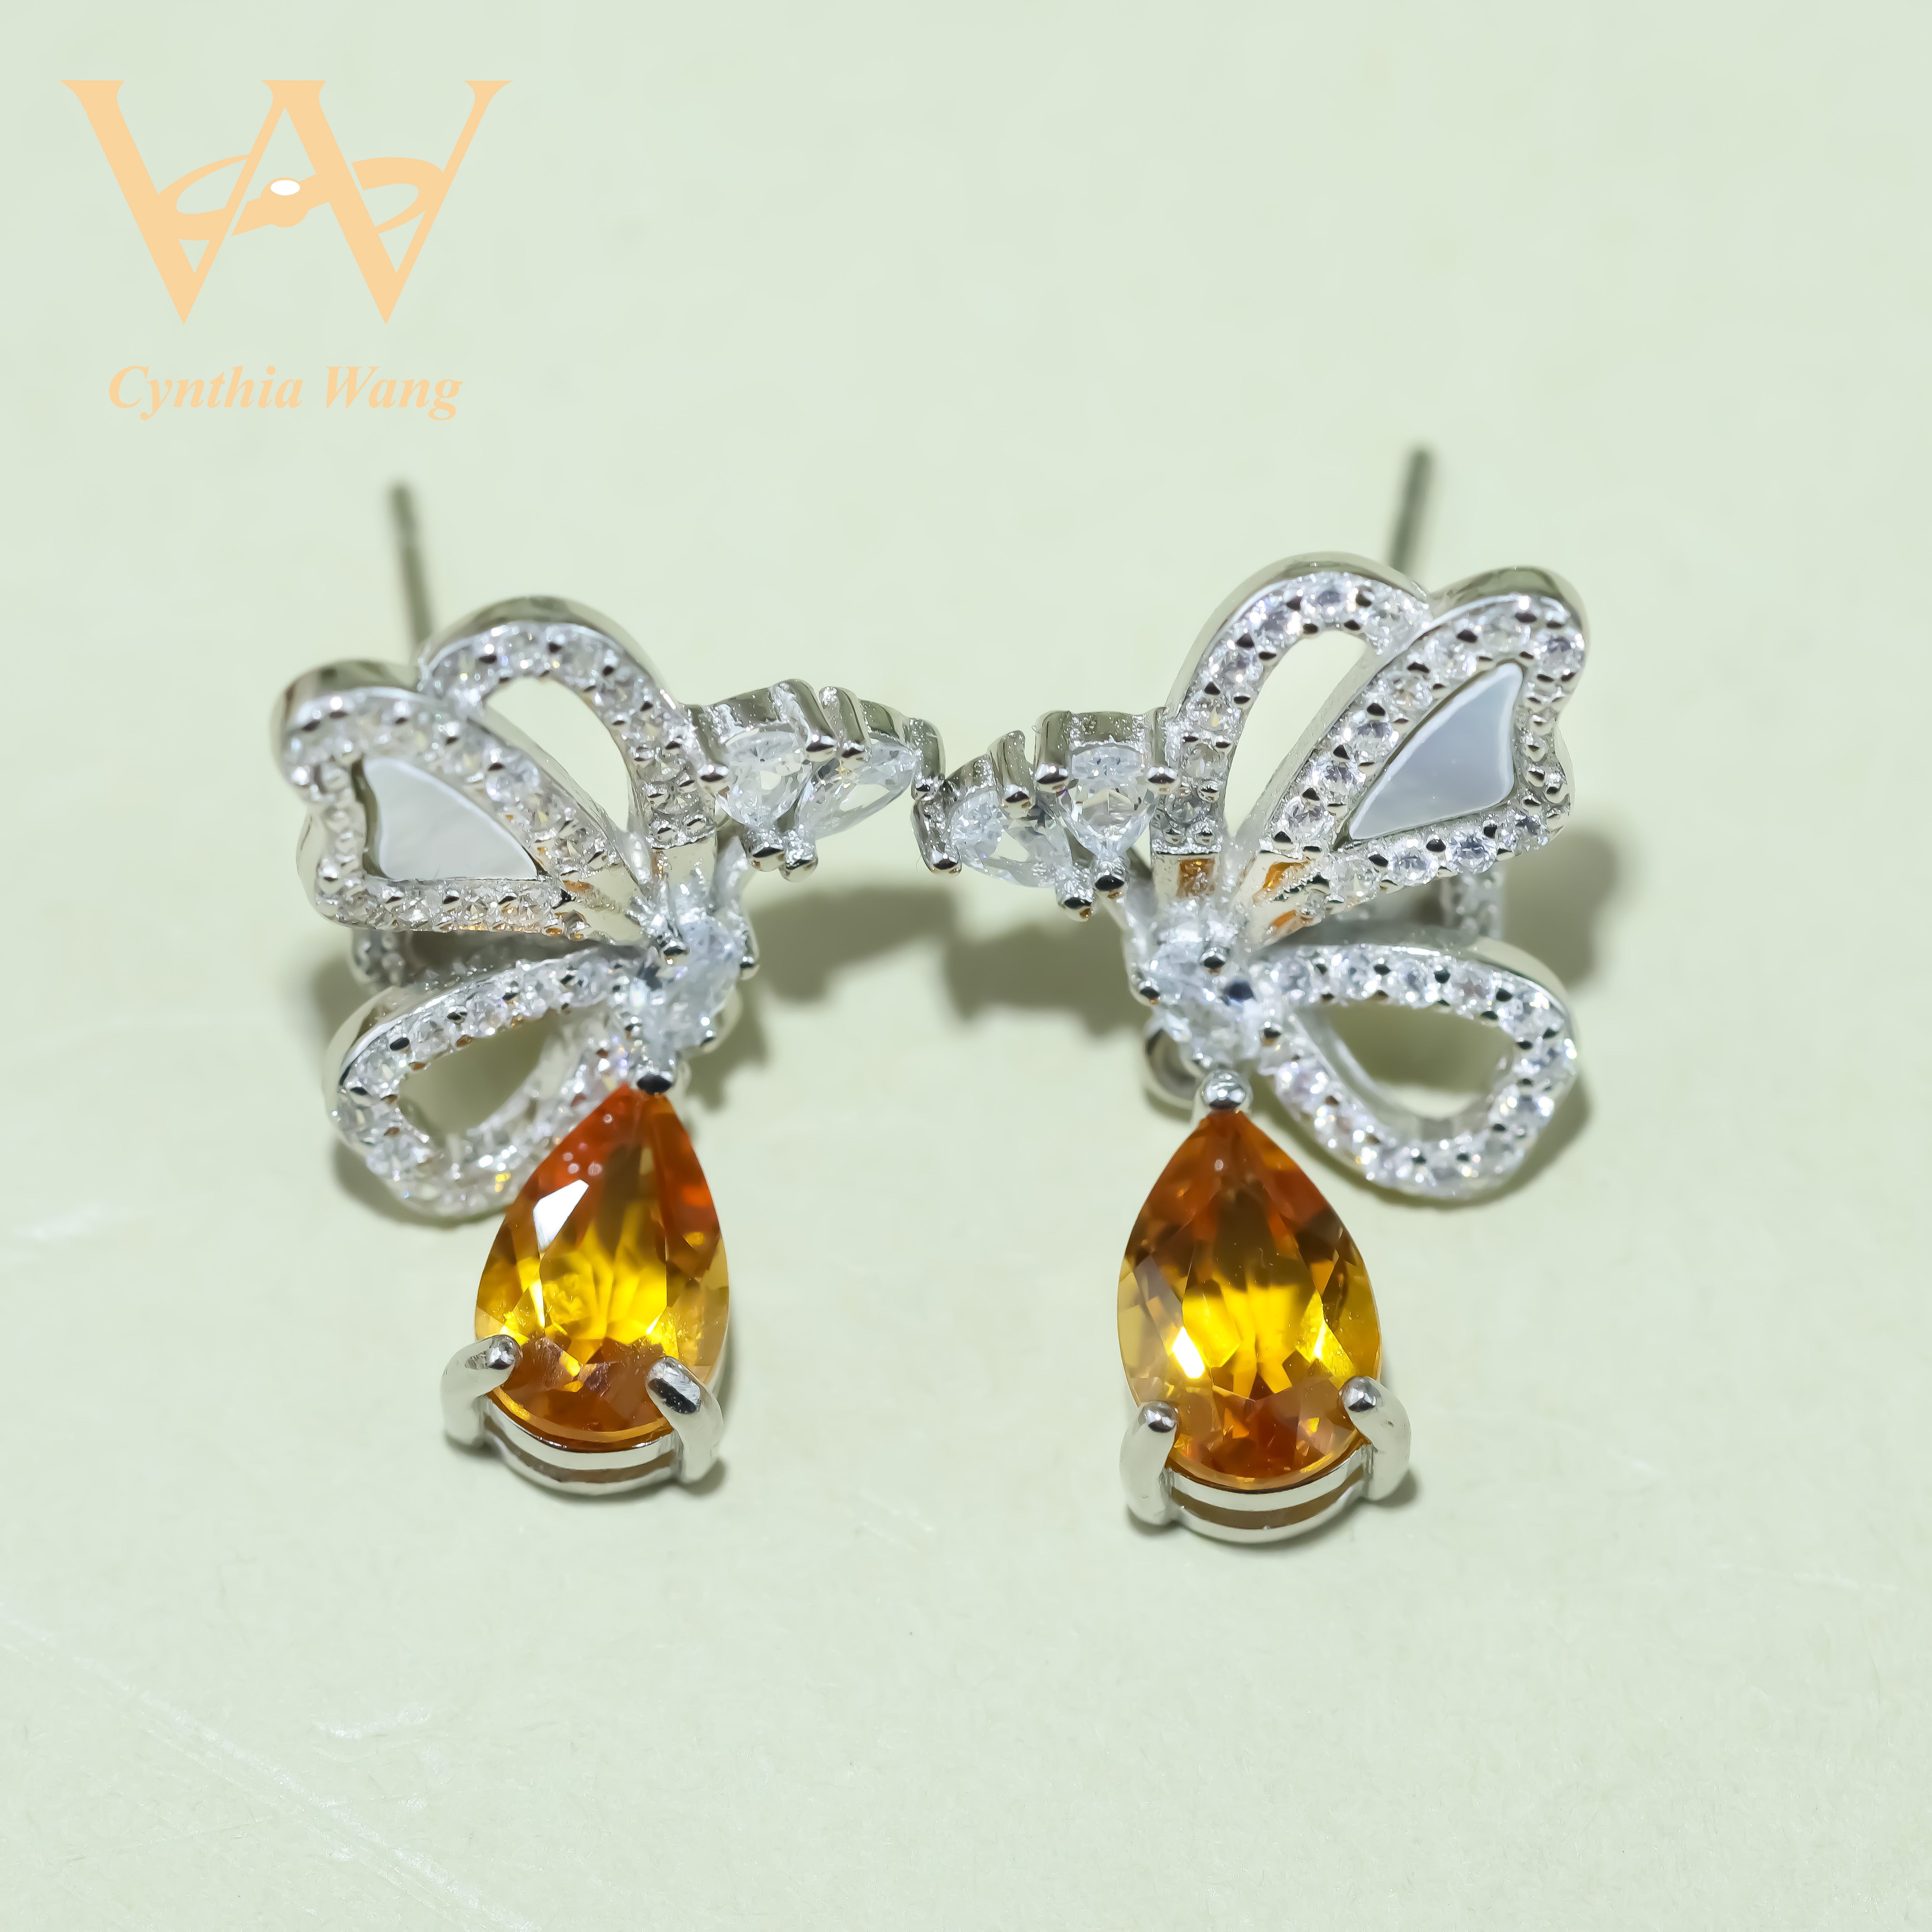 'The Butterfly's Love Song' Citrine Earrings